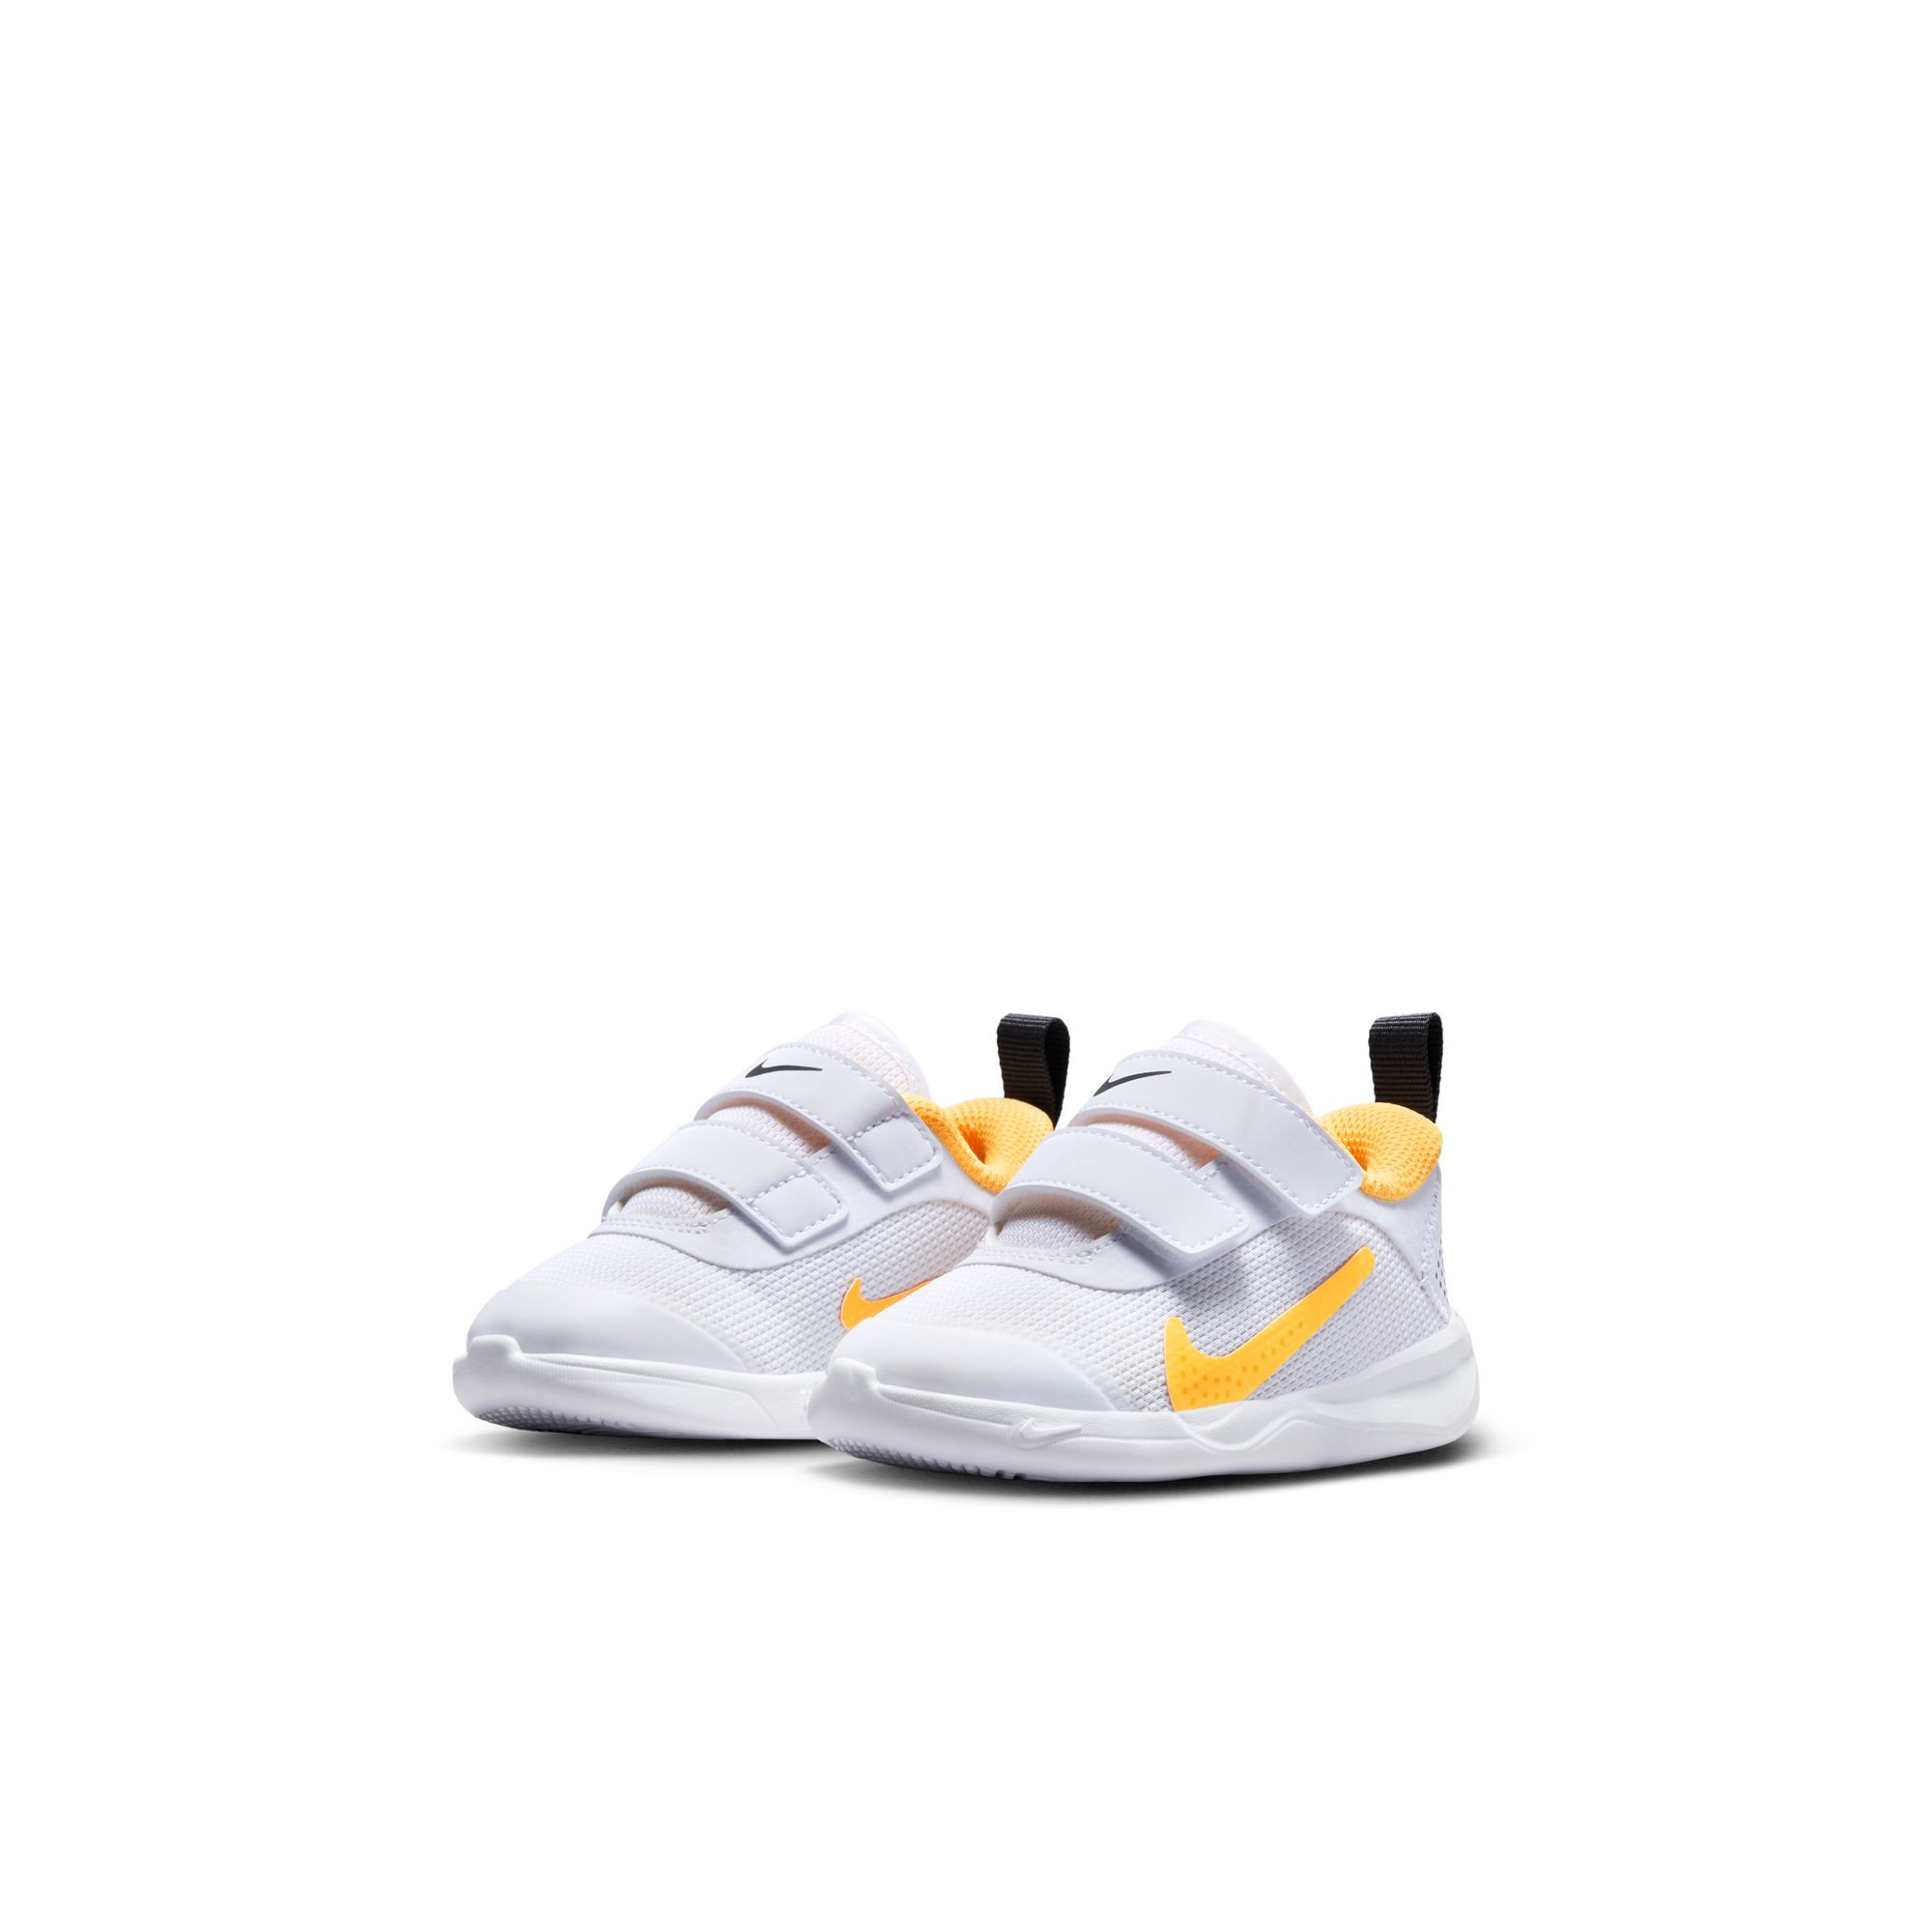 Nike Omni Multi-Court Baby Shoes - White/Pulse Lime-Coral Chalk-Sea Coral - DM9028-102